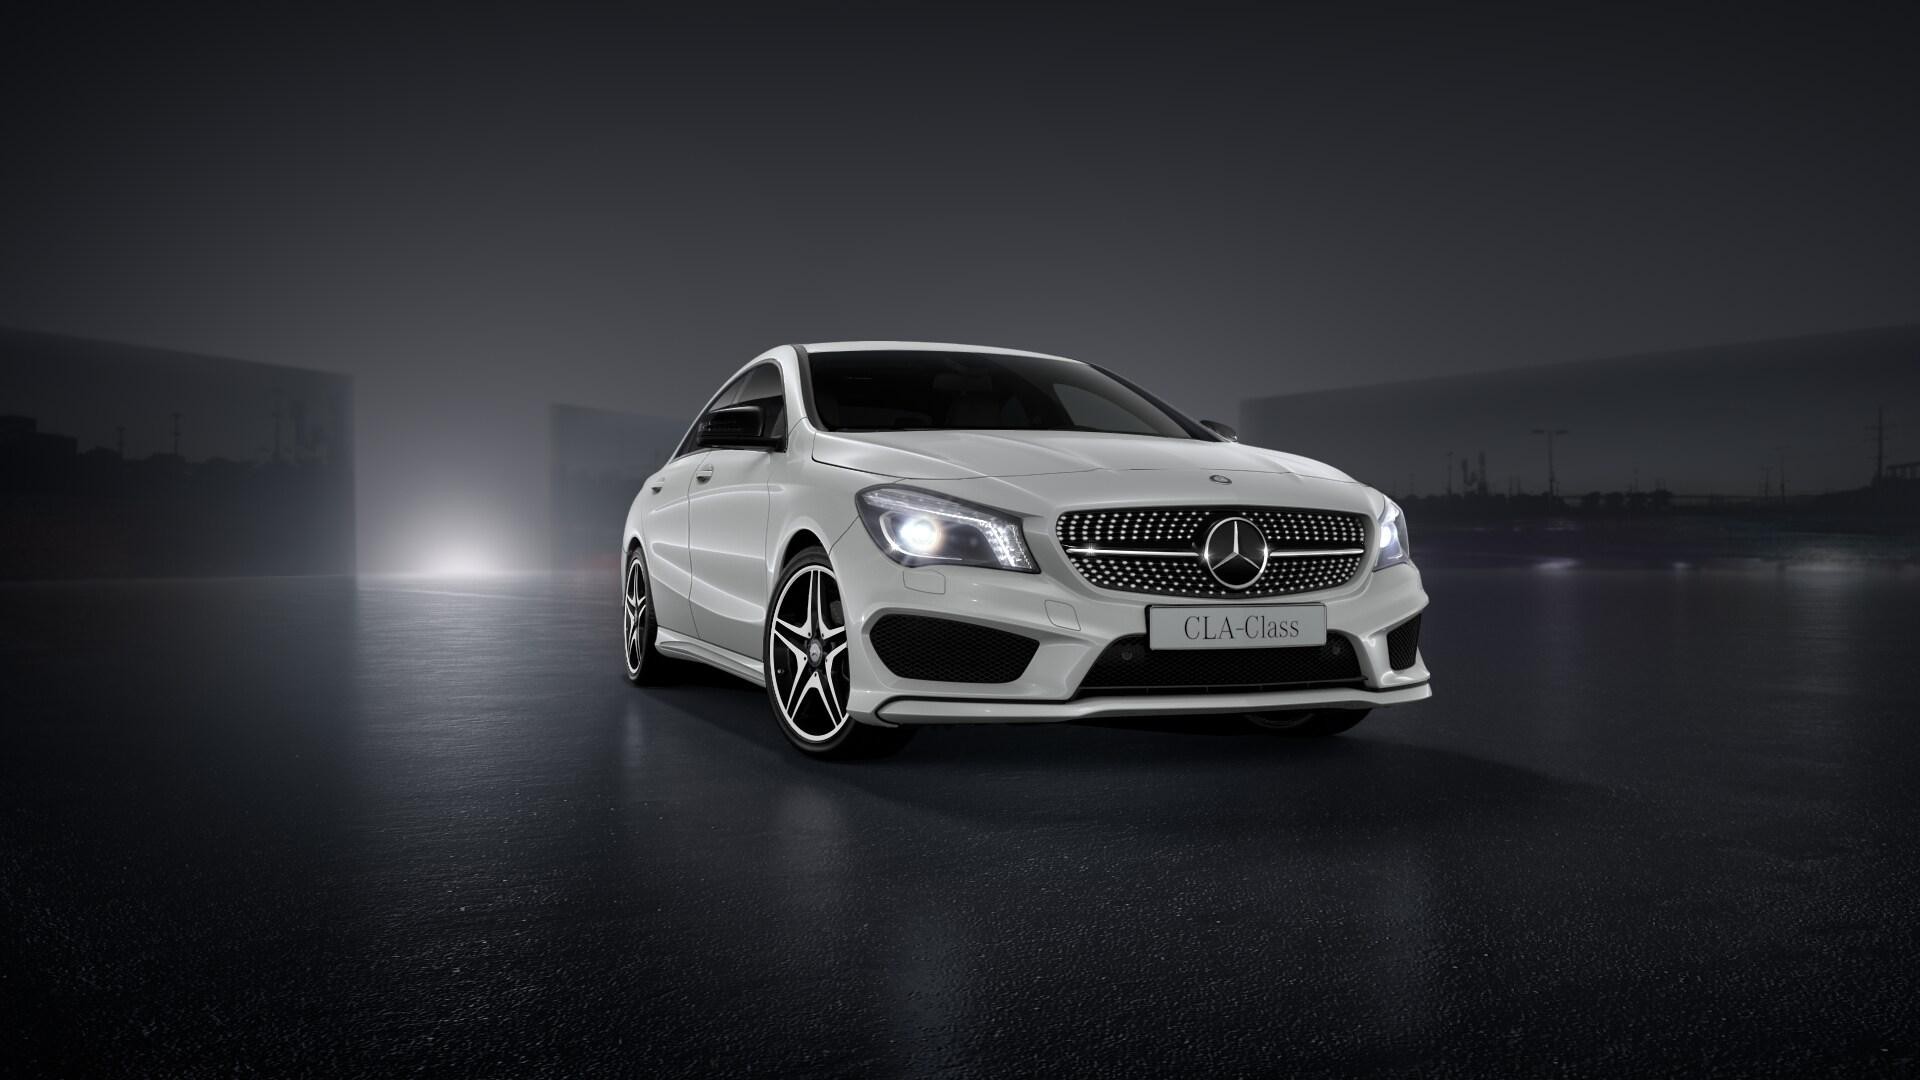 1920x1080 / 1920x1080 Auto, auto wallpaper, white, cls-class, cars, cls 63,  mercedes-benz, amg, white, c218 - Coolwallpapers.me!